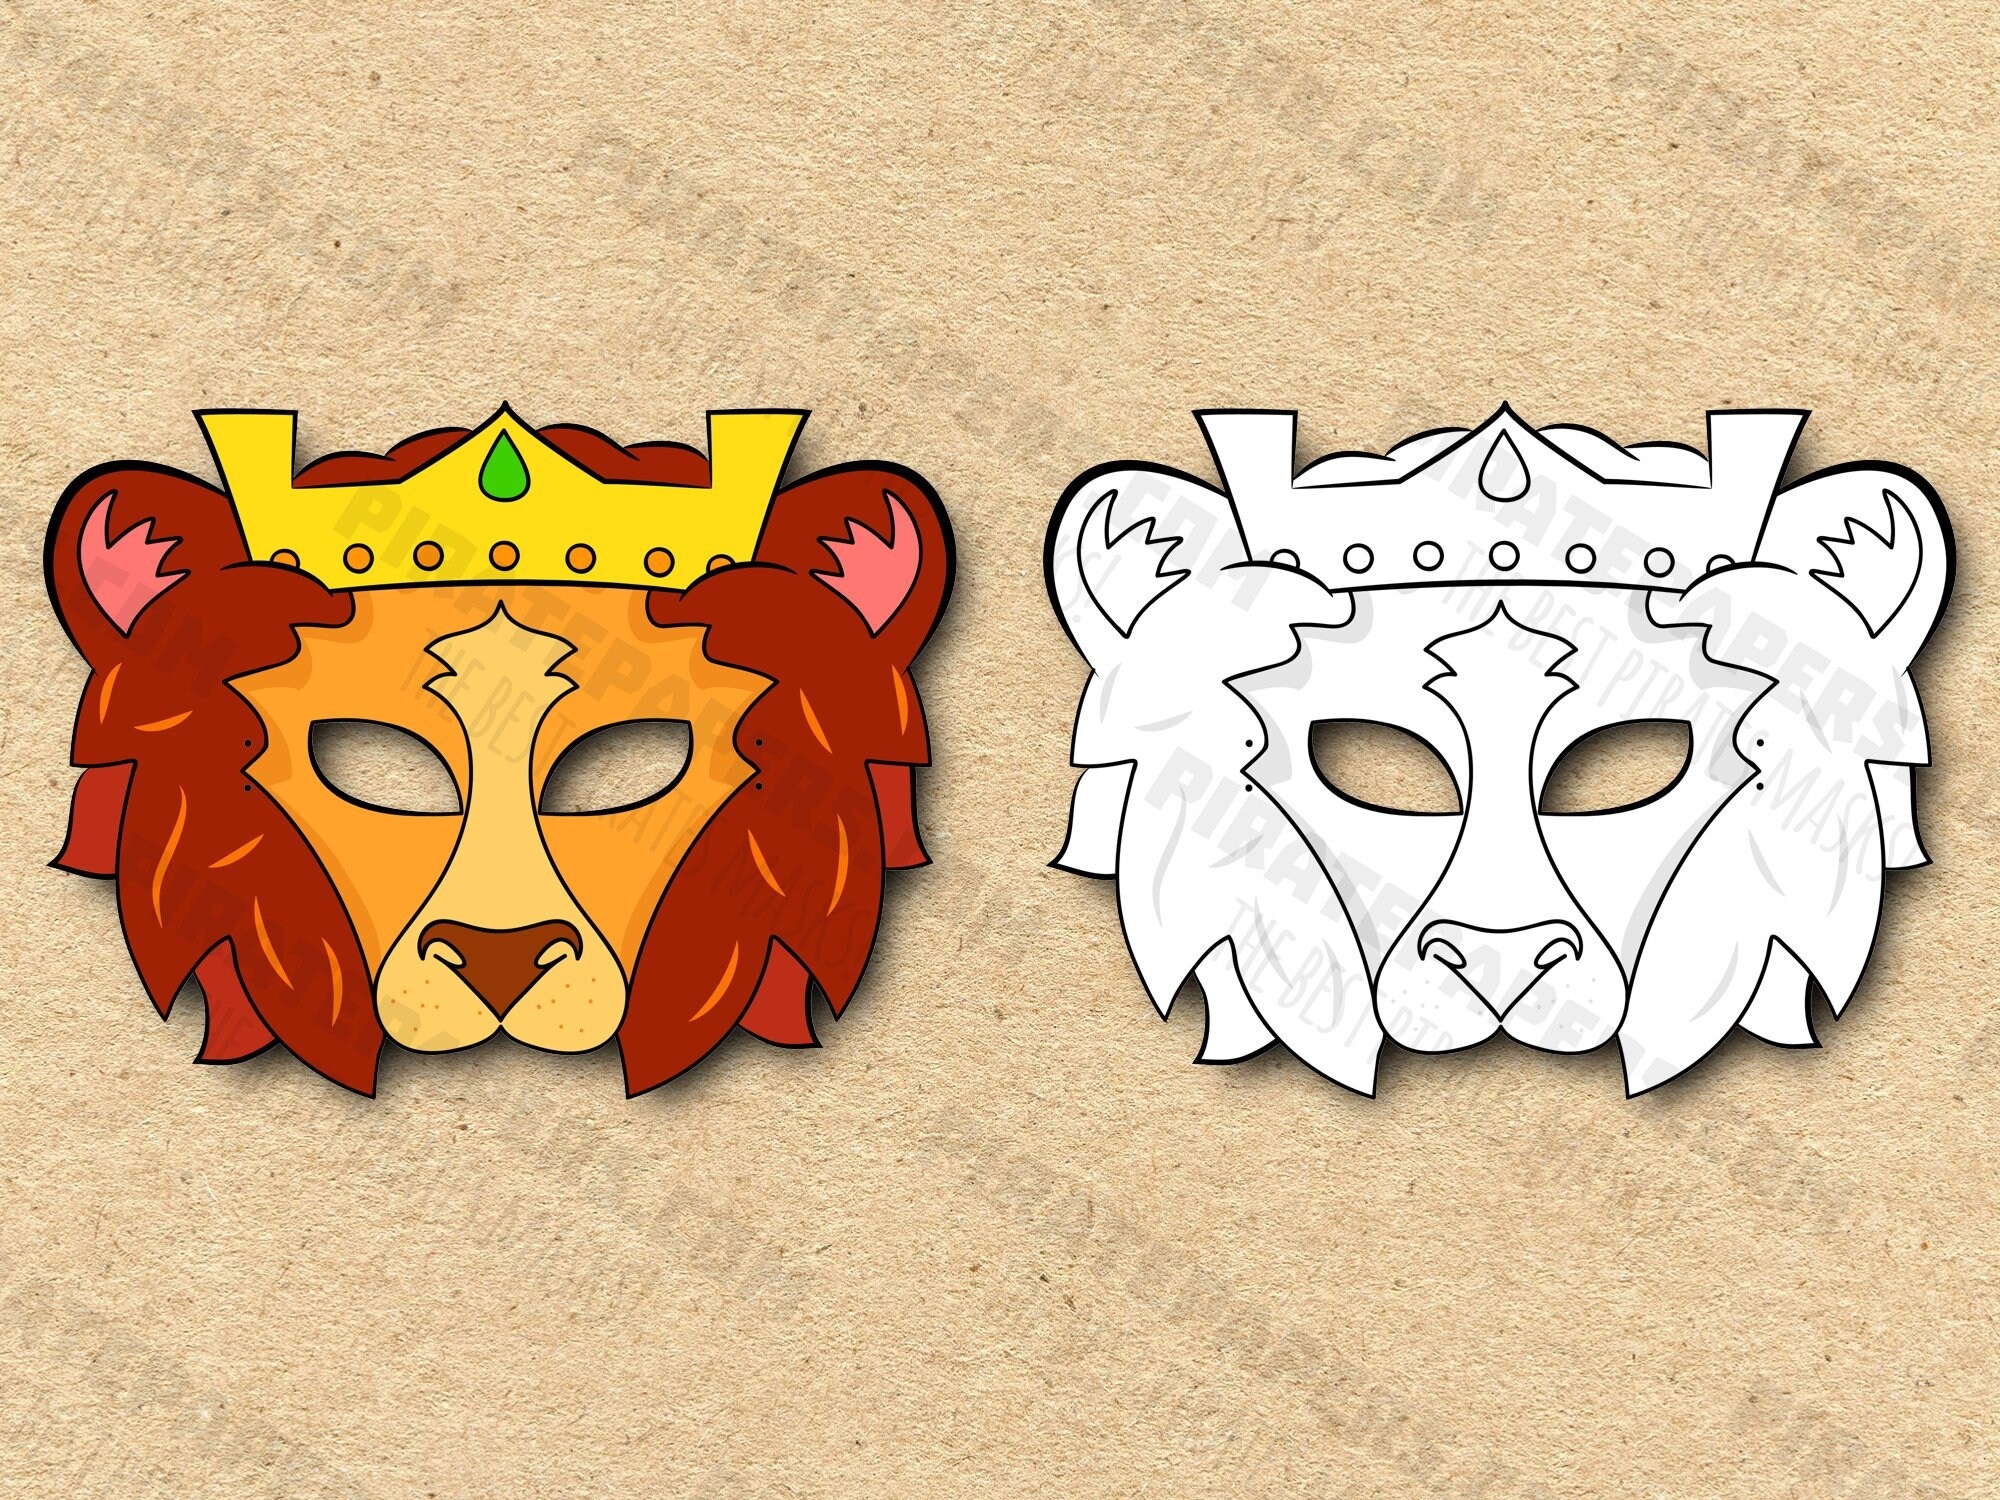 Lion King Masks Printable Color Coloring Paper DIY For Kids And Adults PDF Template Instant Download Birthdays Halloween Costumes Etsy